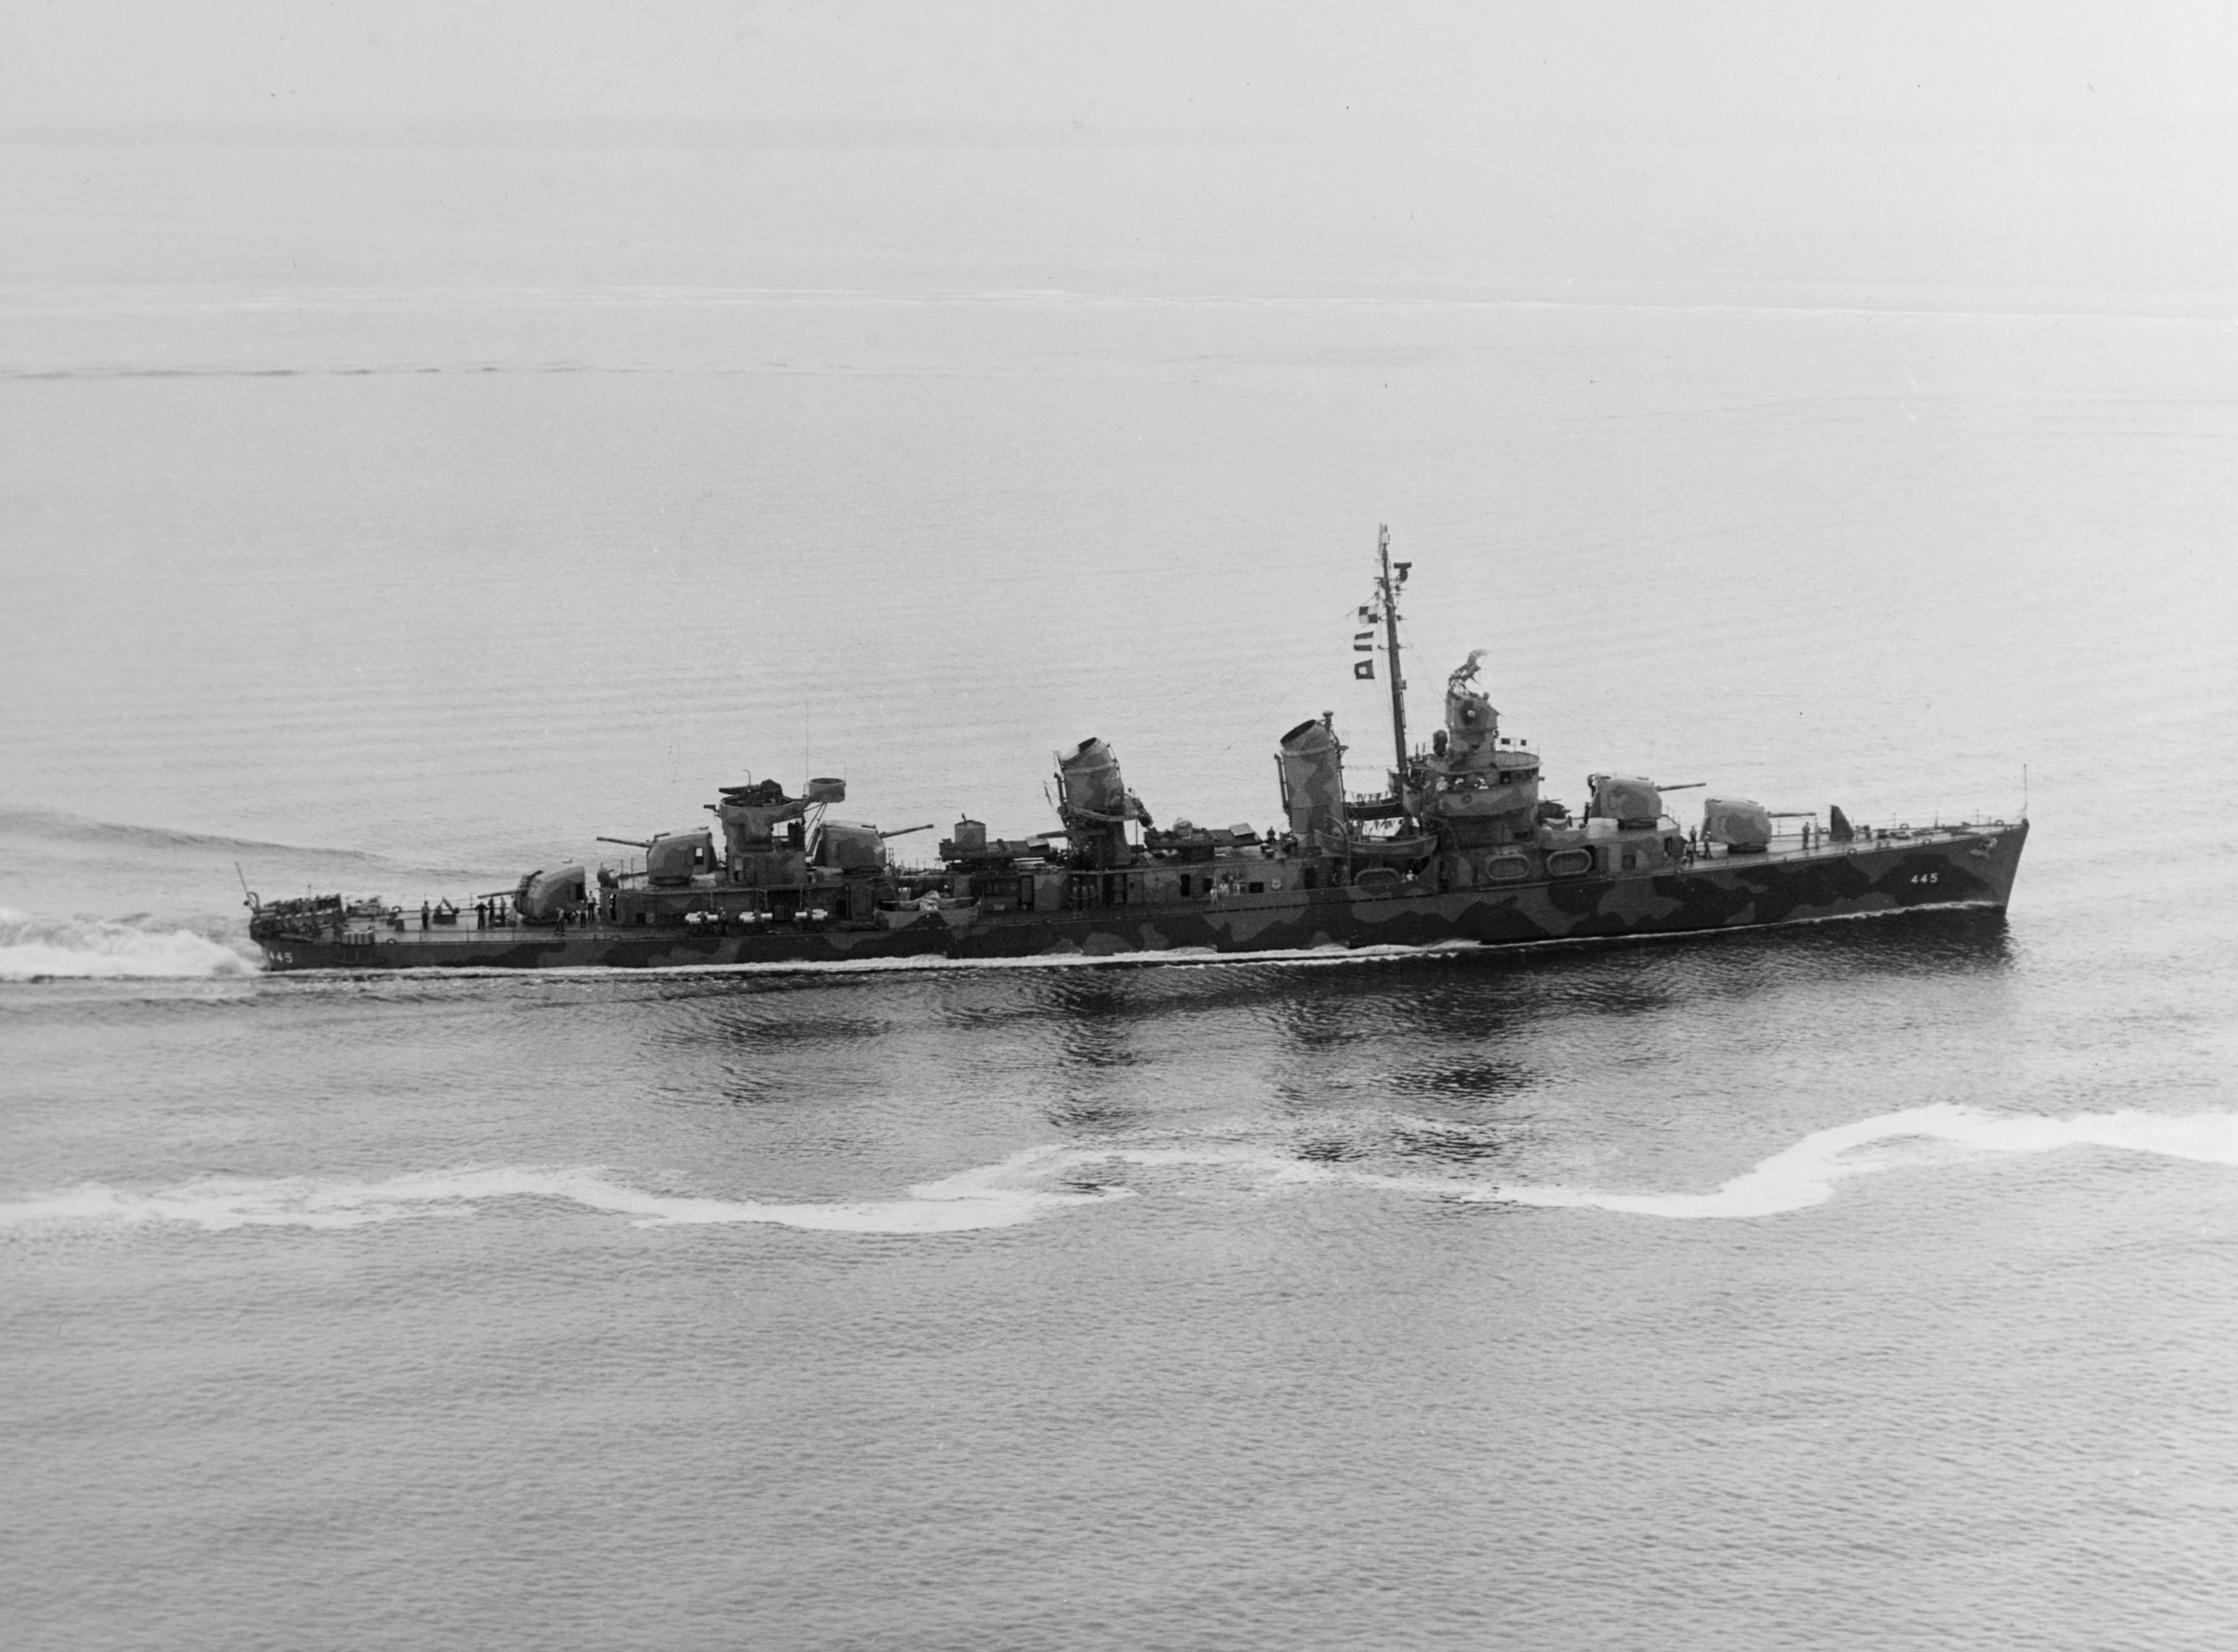 The USS Fletcher at sea in July 1942